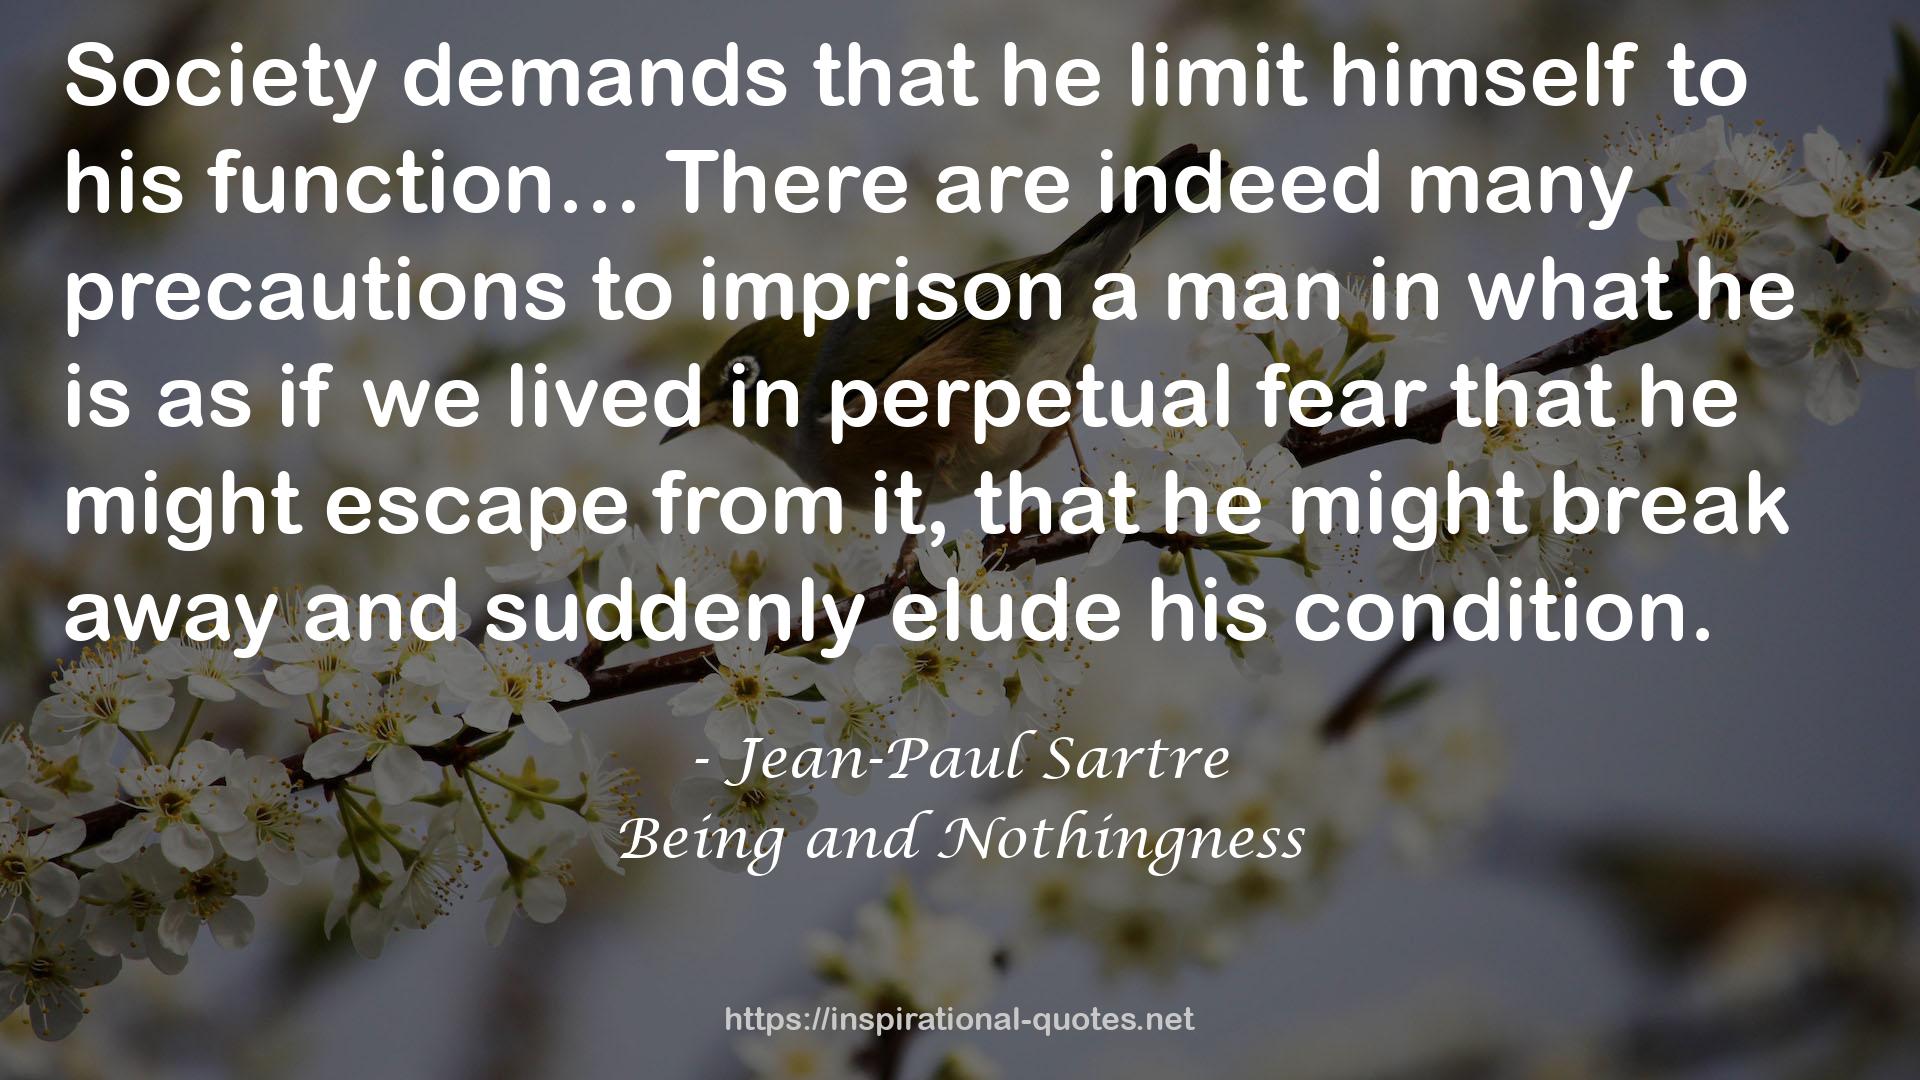 Being and Nothingness QUOTES